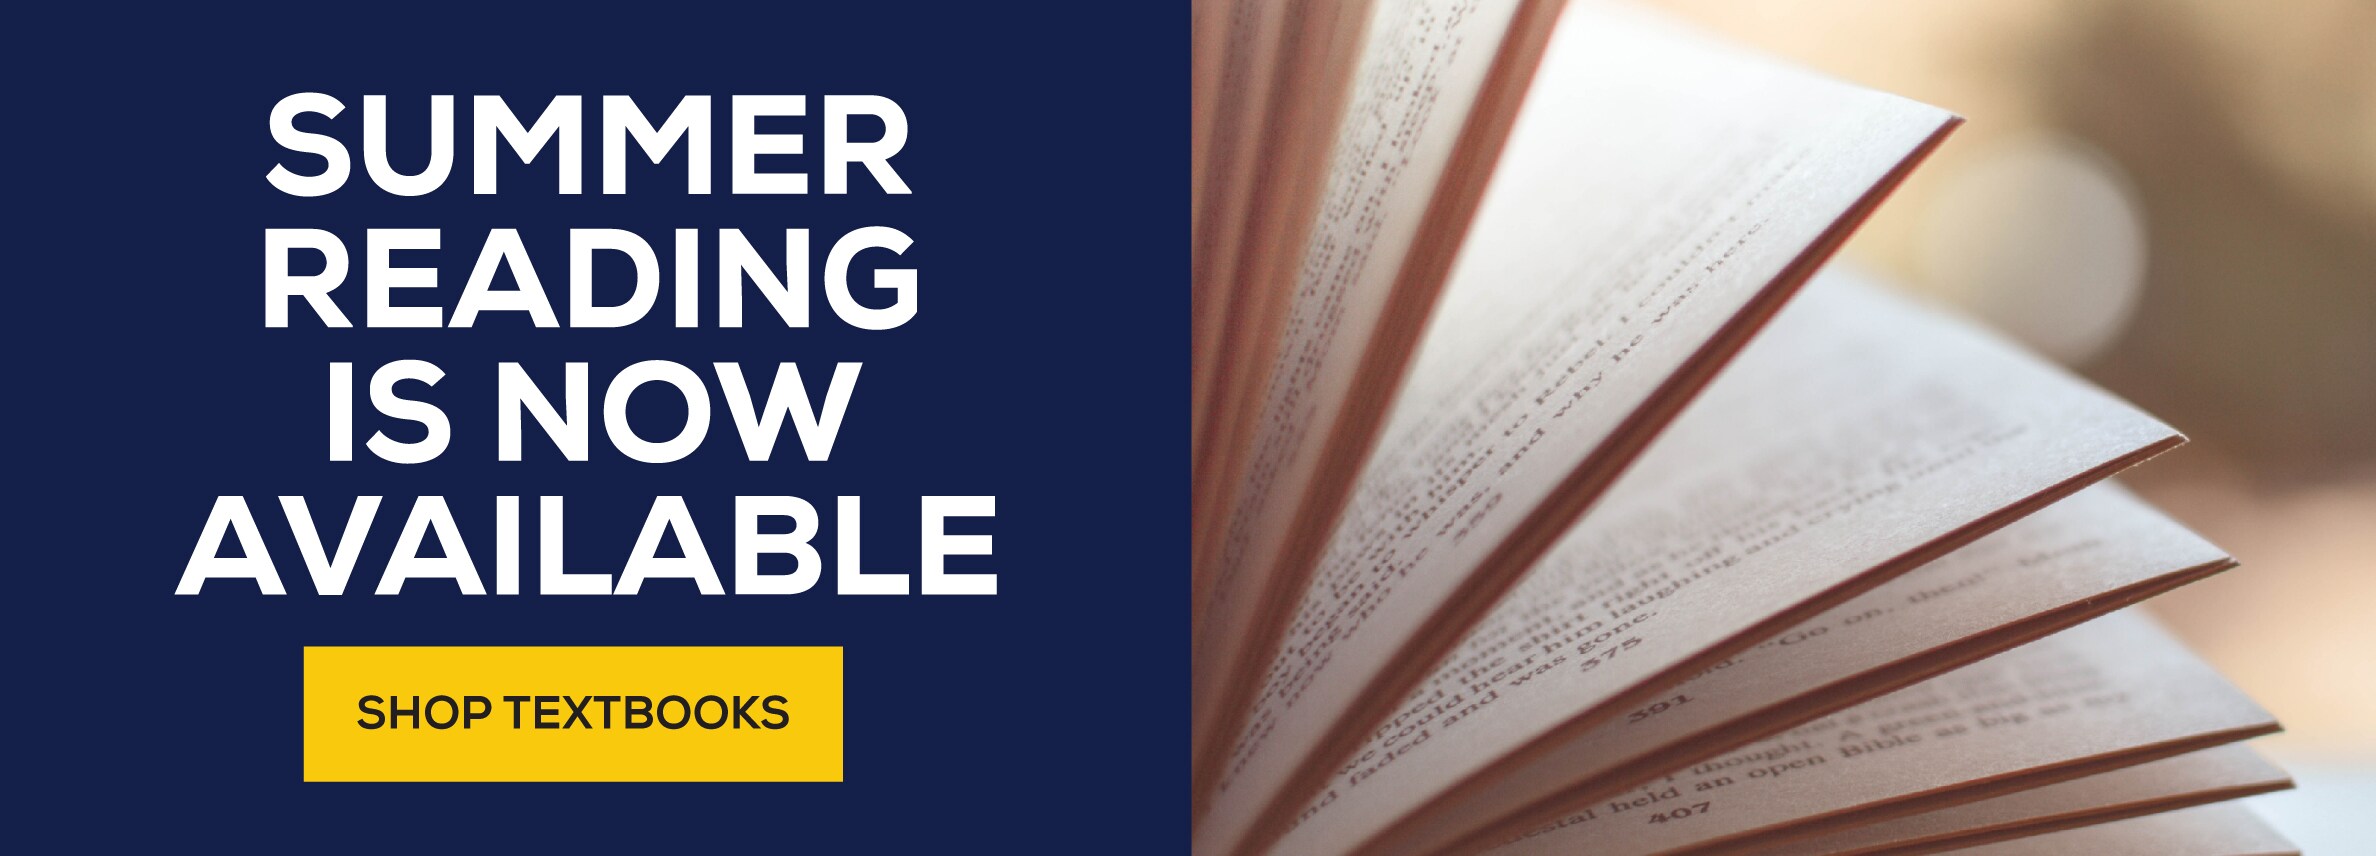 Summer Reading is now available. Shop textbooks